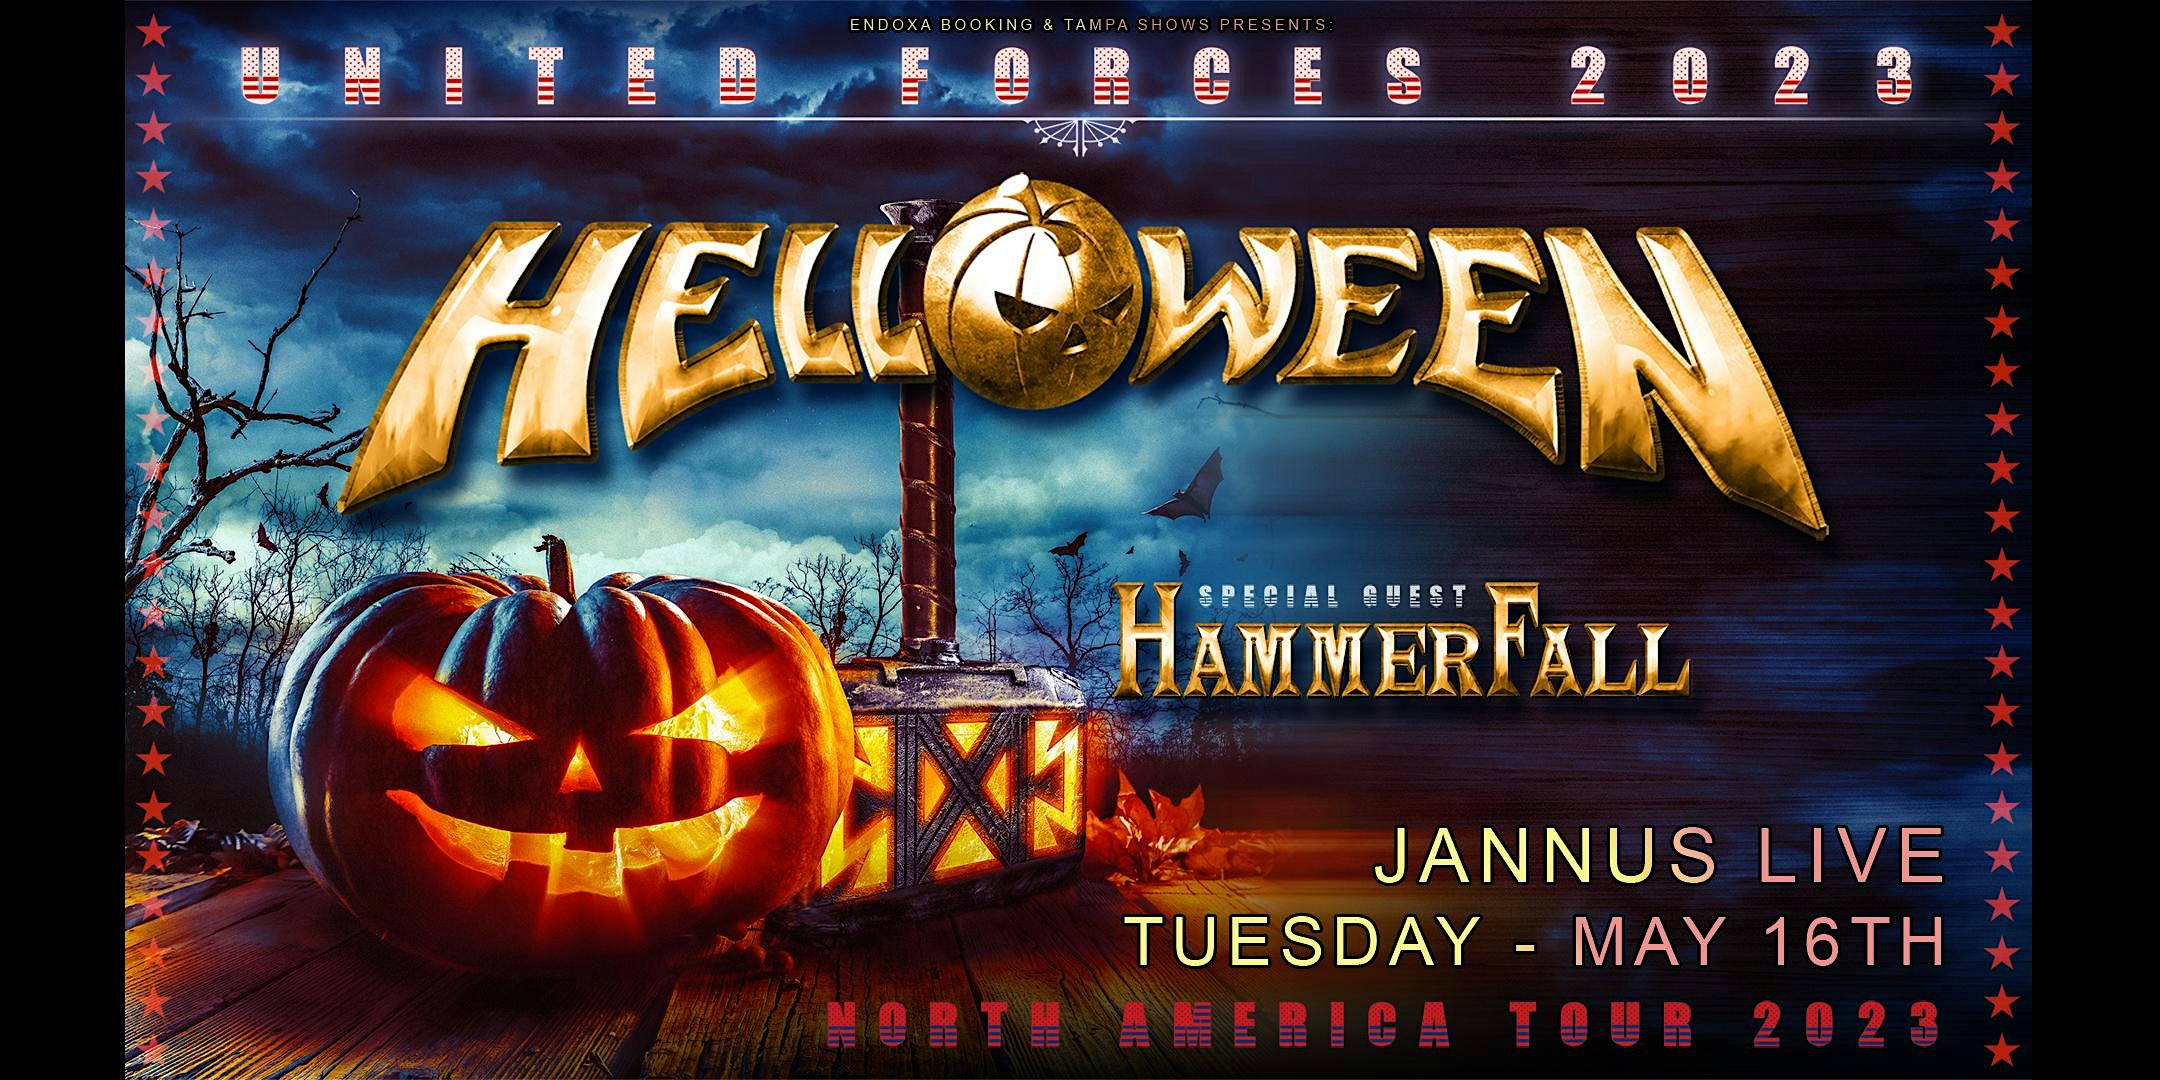 The only Florida show for Helloween and Hammerfall!